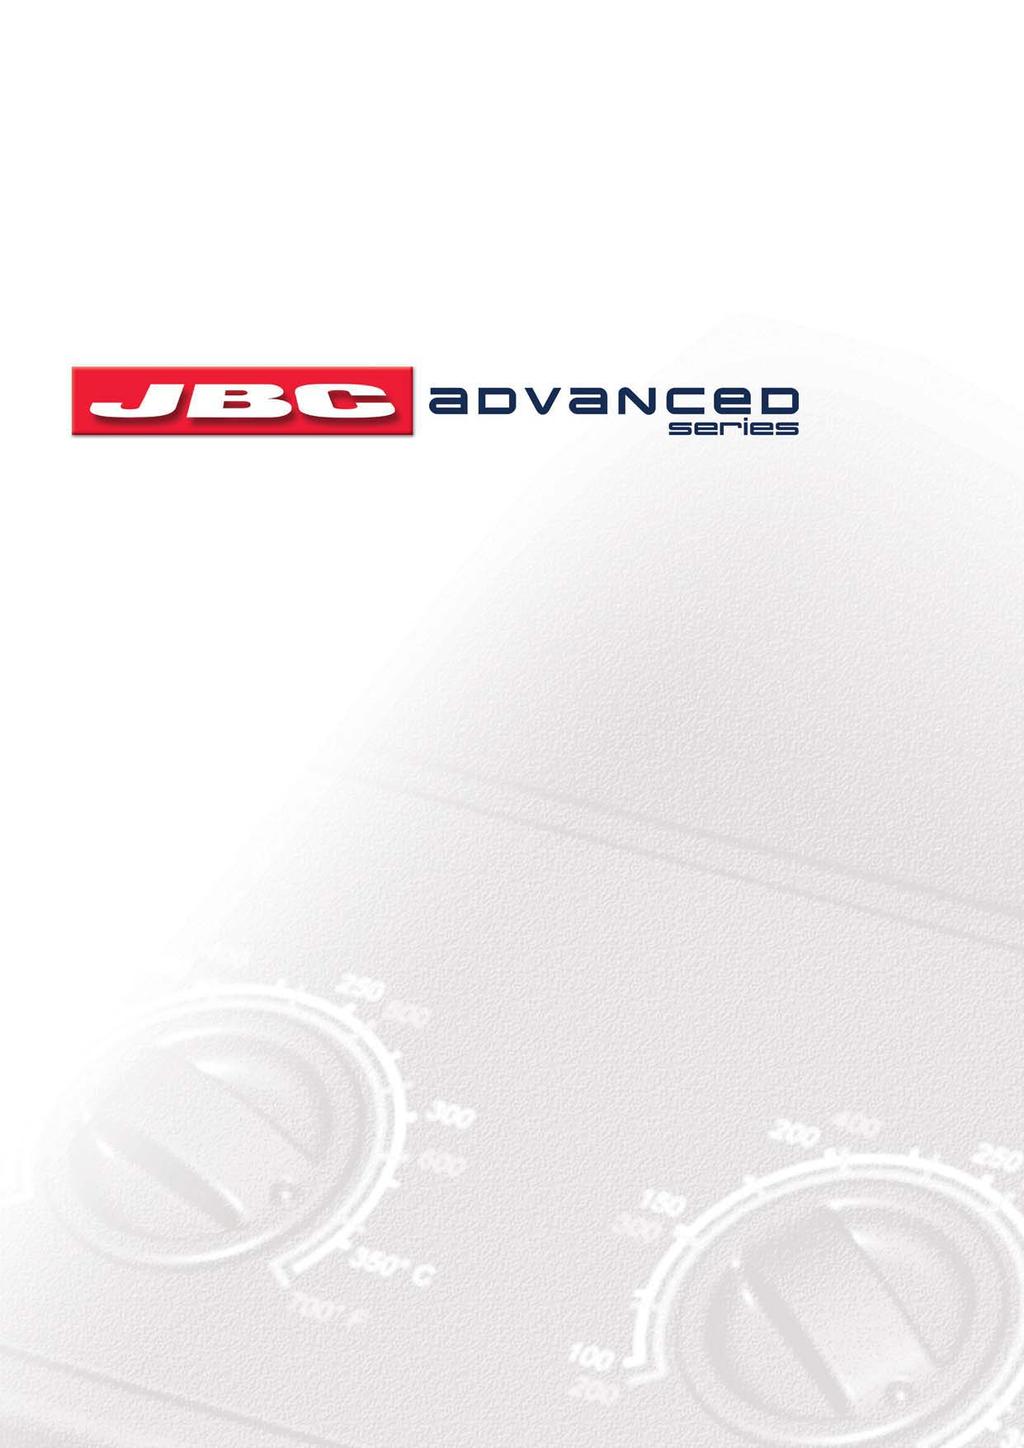 The exclusive and new JBC microprocessor driven heating system ensures such a fast heat recovery that it enables performing at lower temperatures than before and improving a 80% the efficiency of the